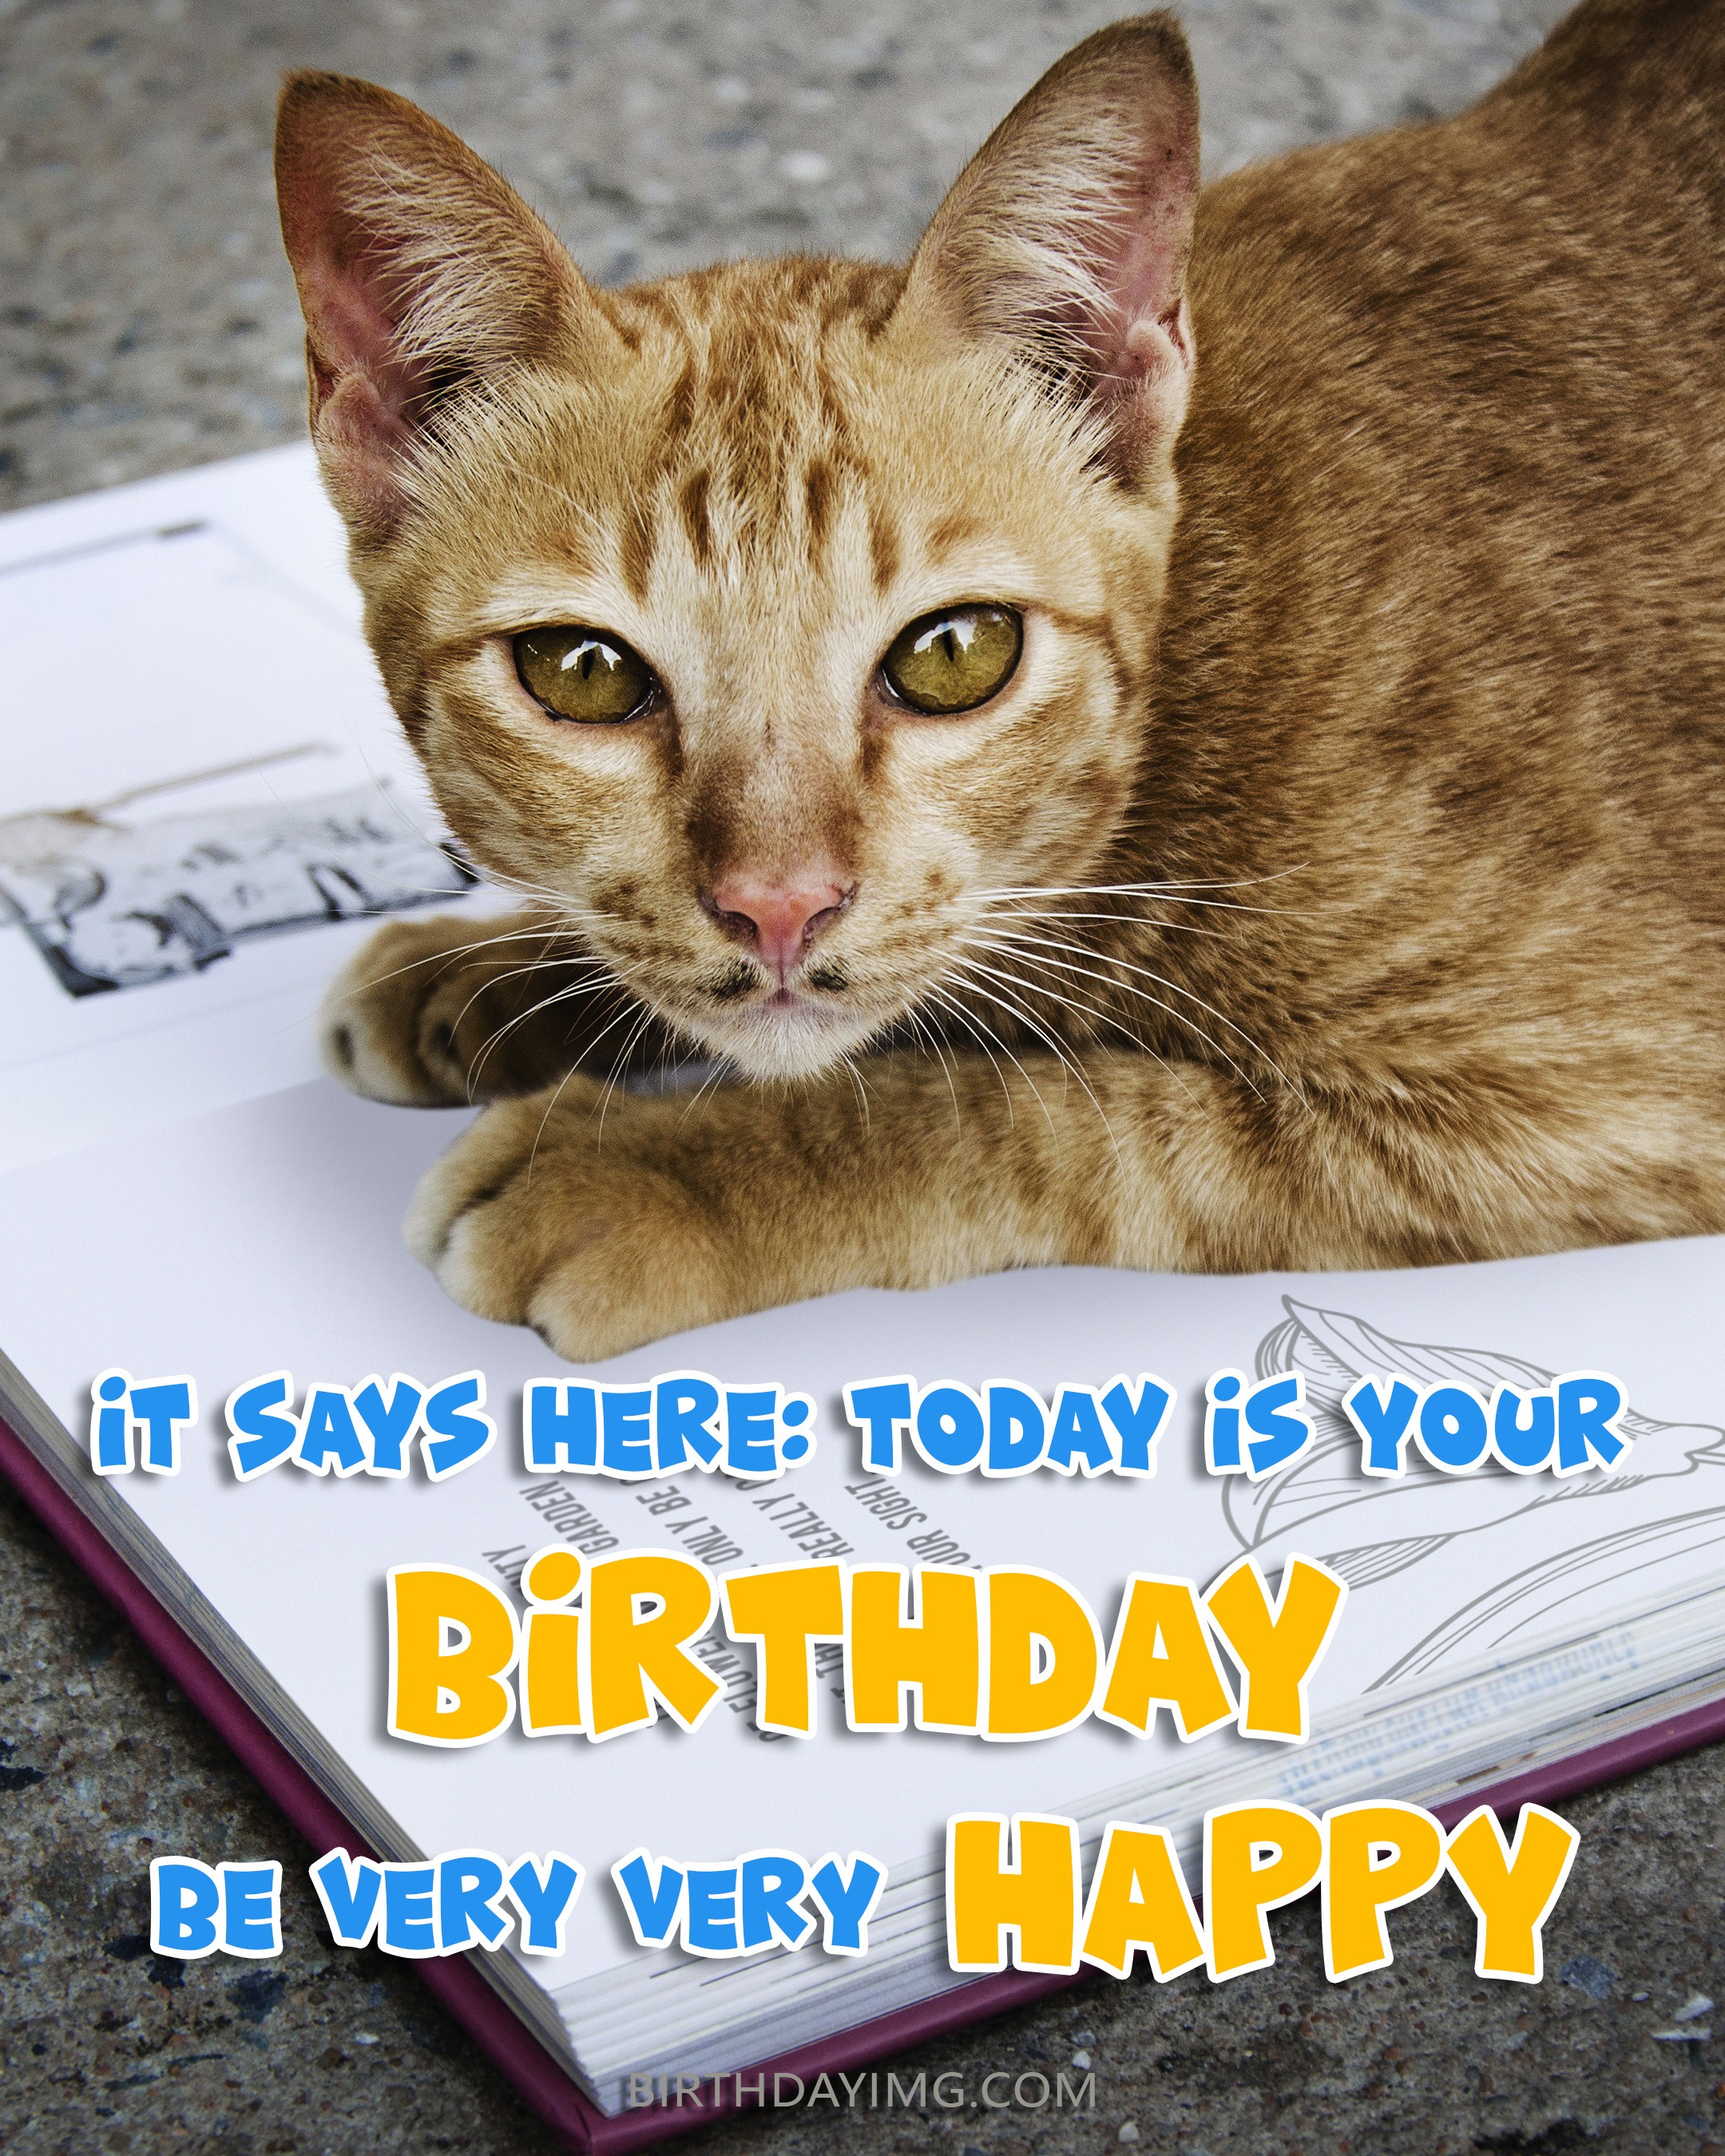 Free Funny Happy Birthday Image With Cute Red Cat 